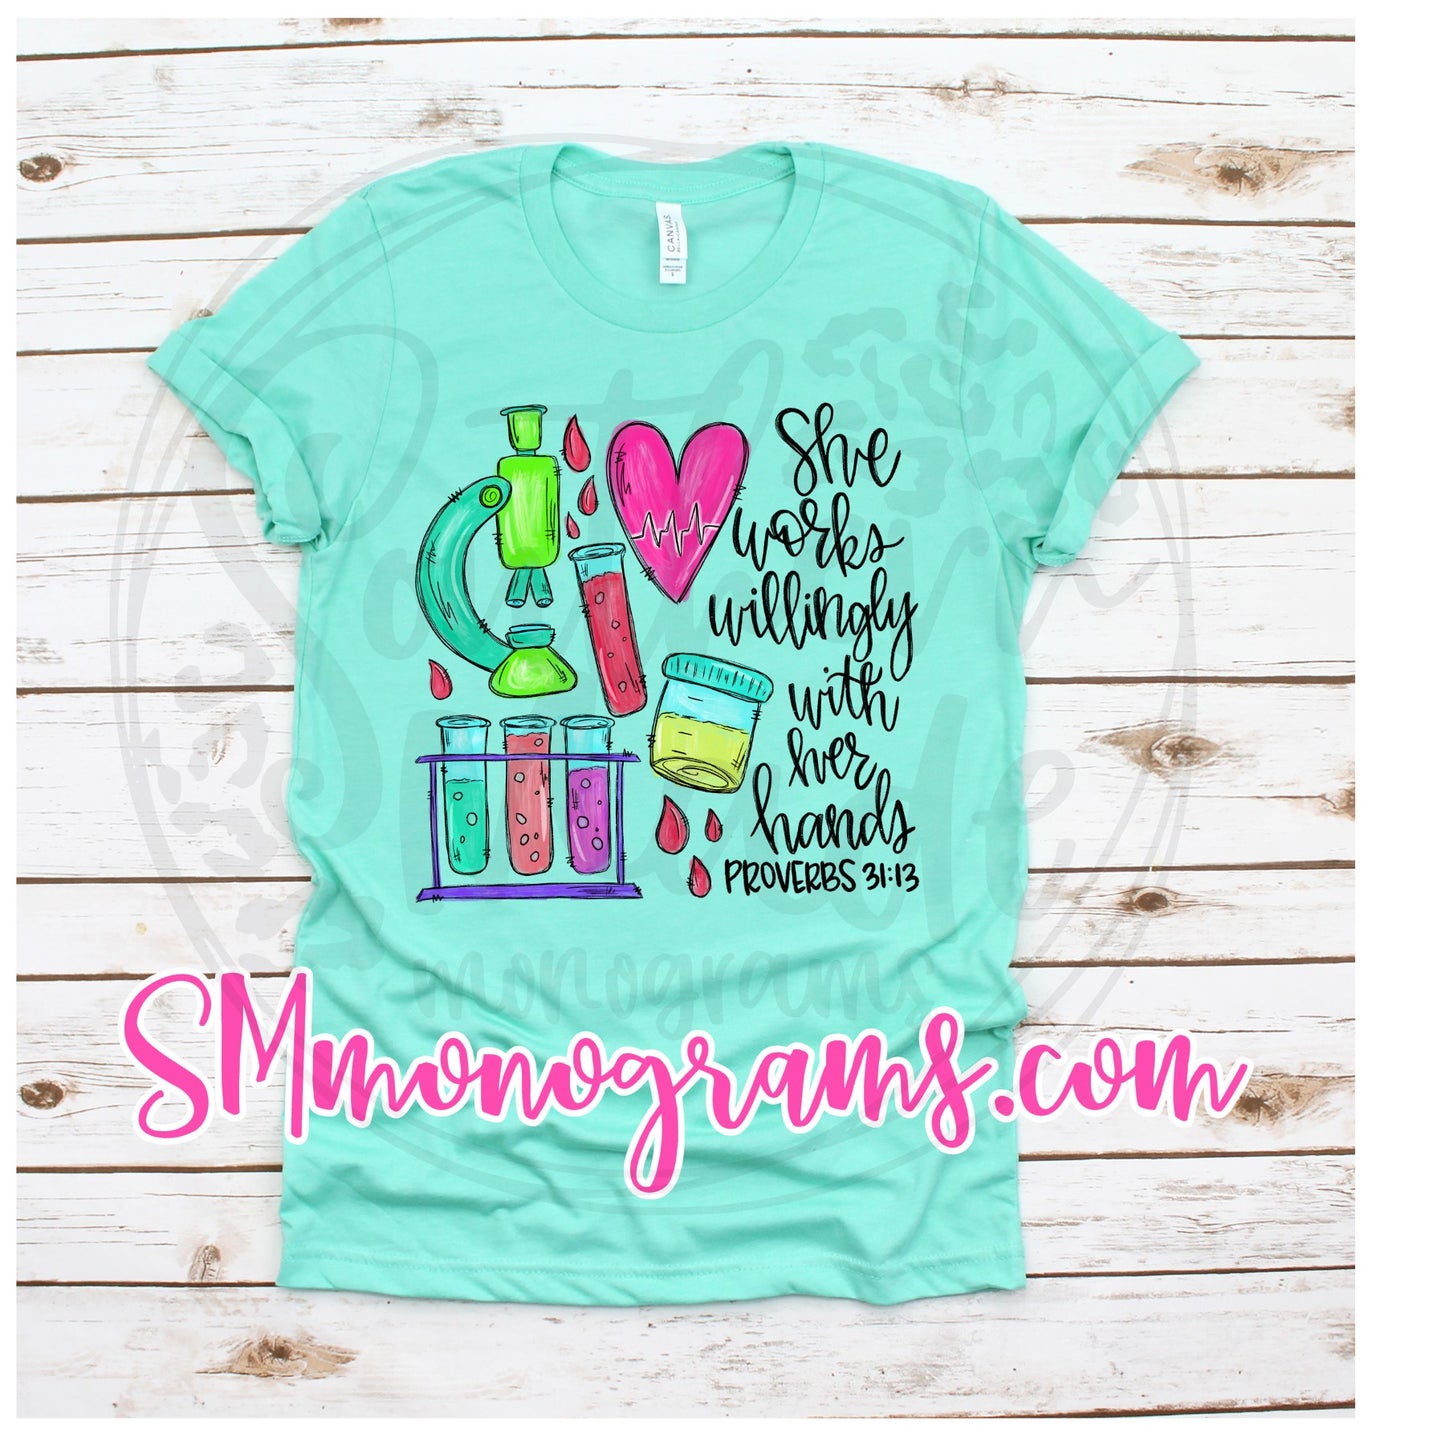 Lab Tech - She Works Willingly With Her Hands Proverbs 31:13 - Tee, Tank or Raglan